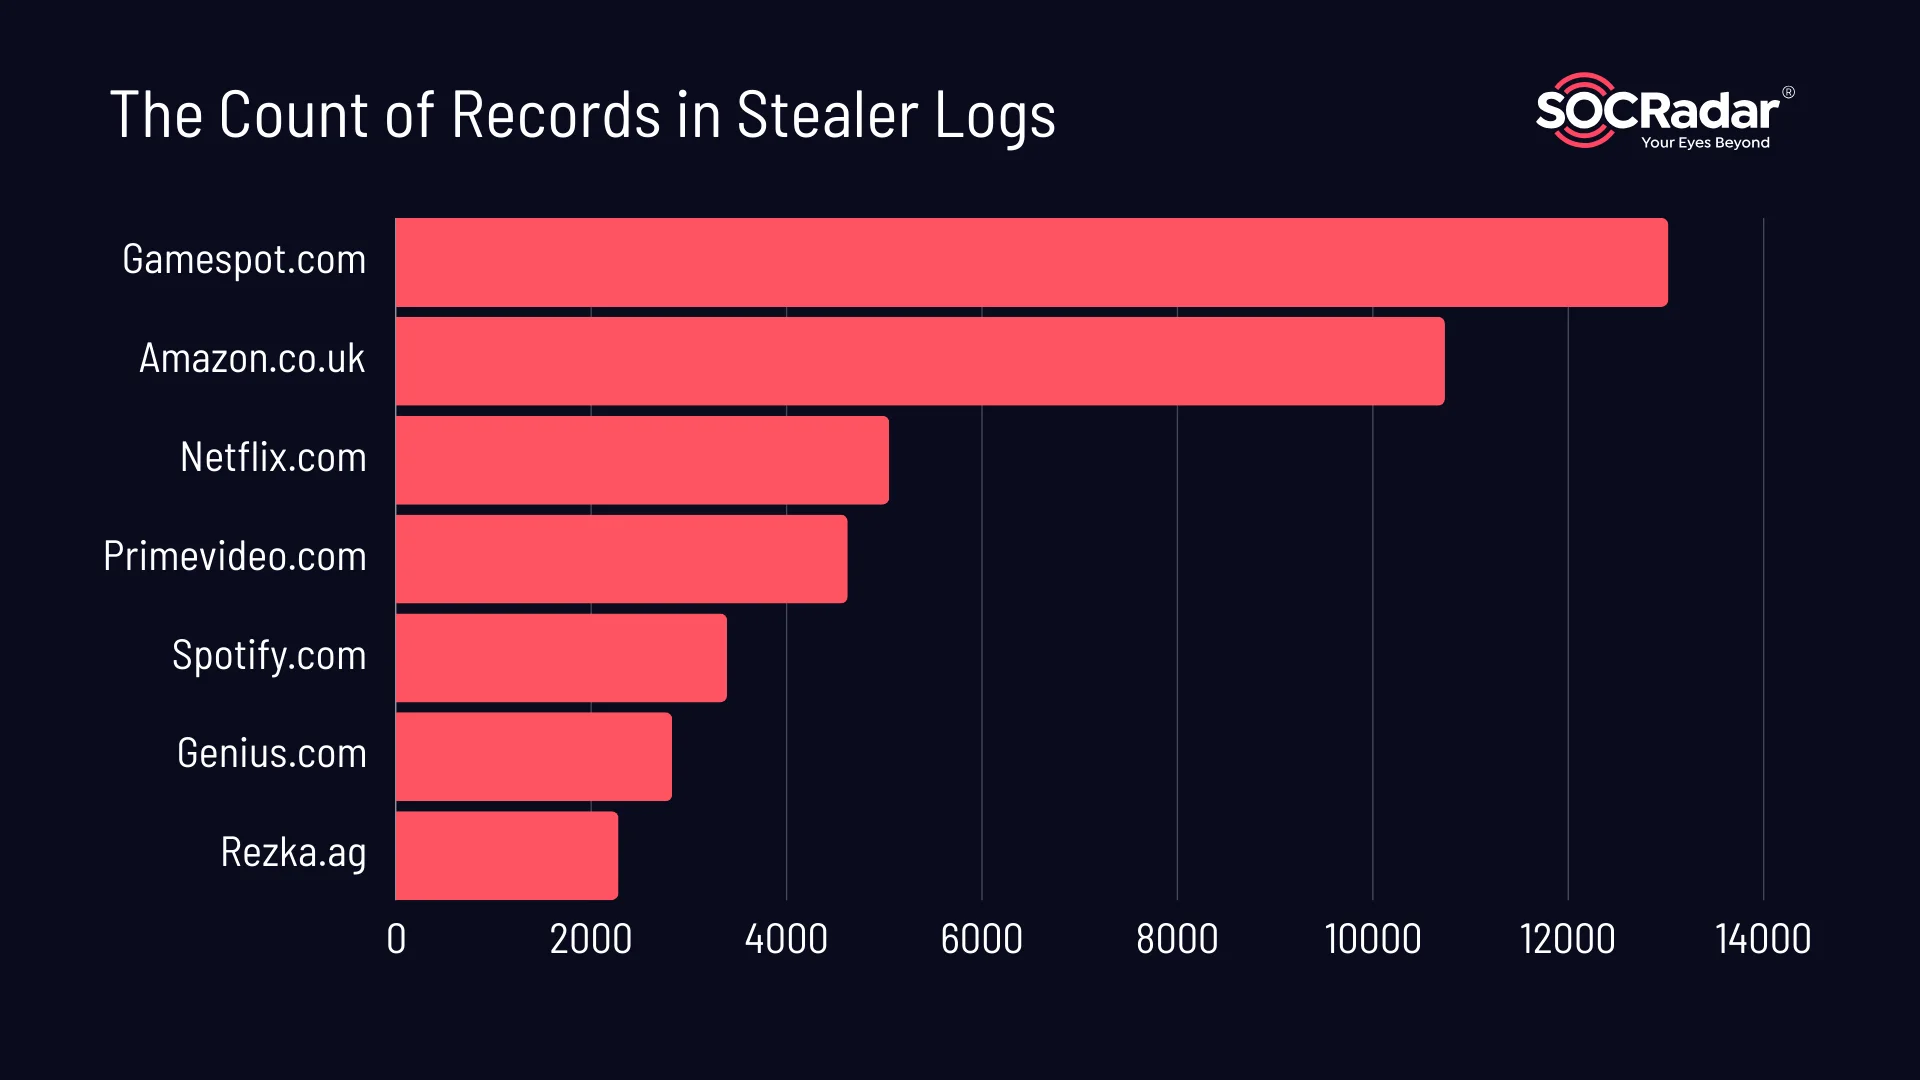 Bar chart depicting the count of records in stealer logs.